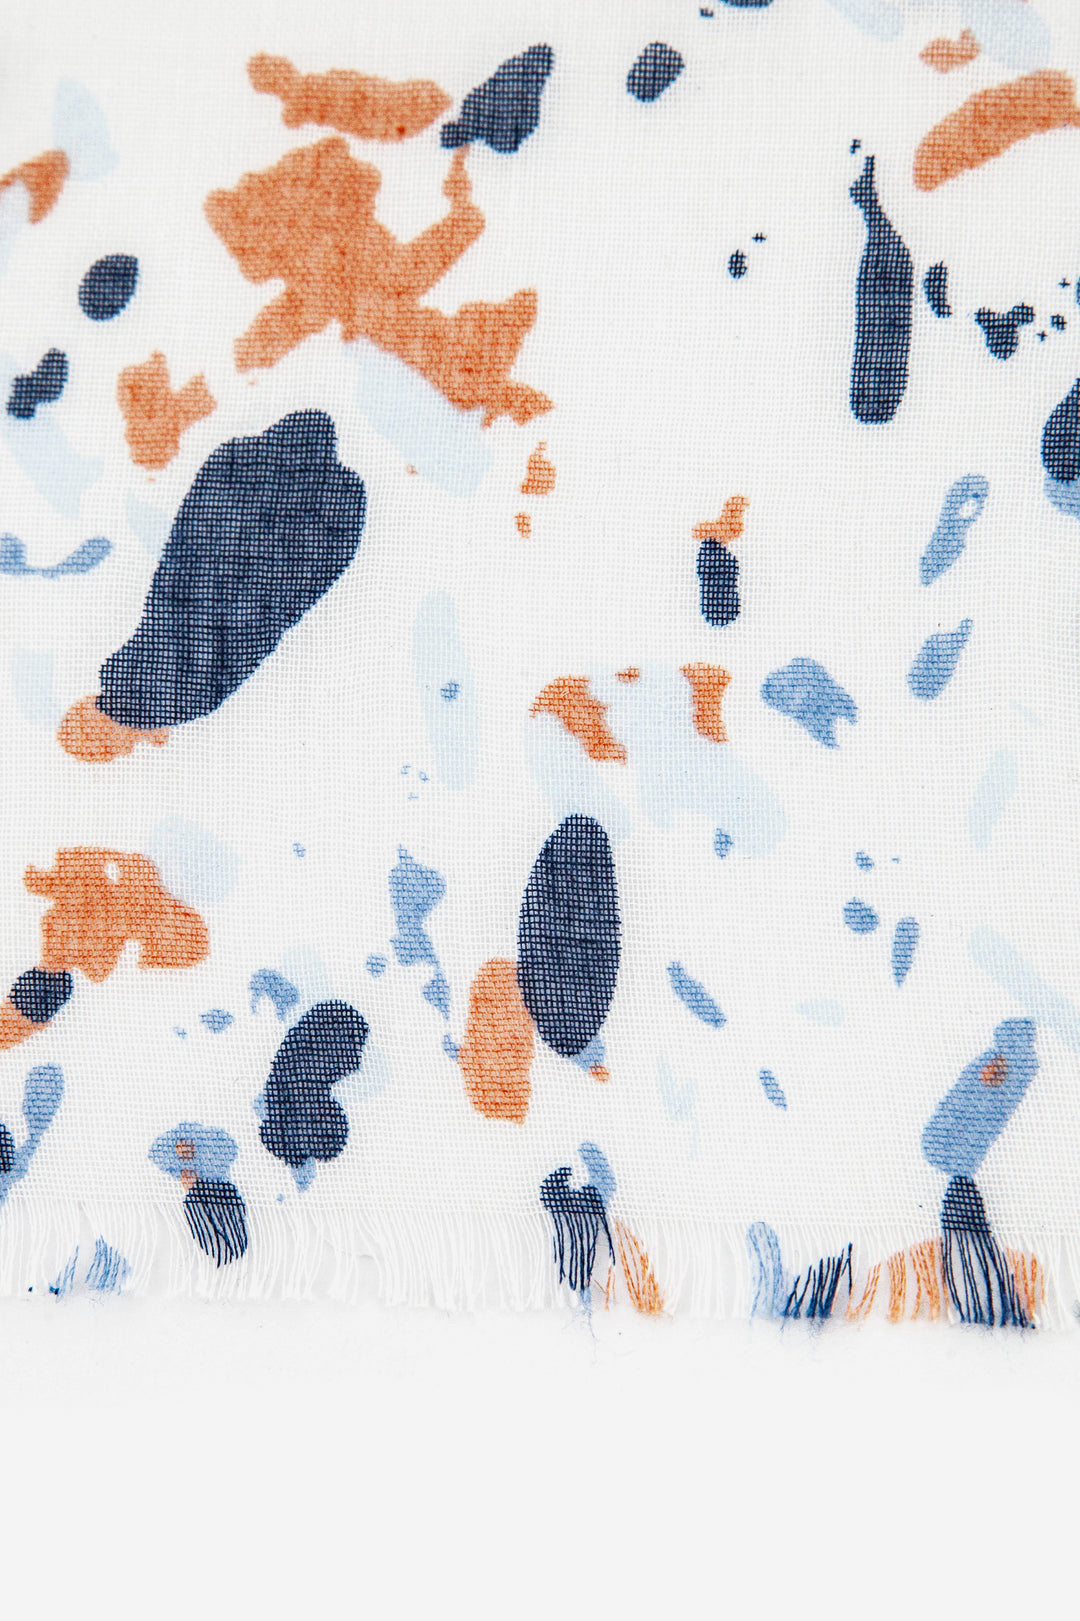 close up of the abstract animal spot print pattern